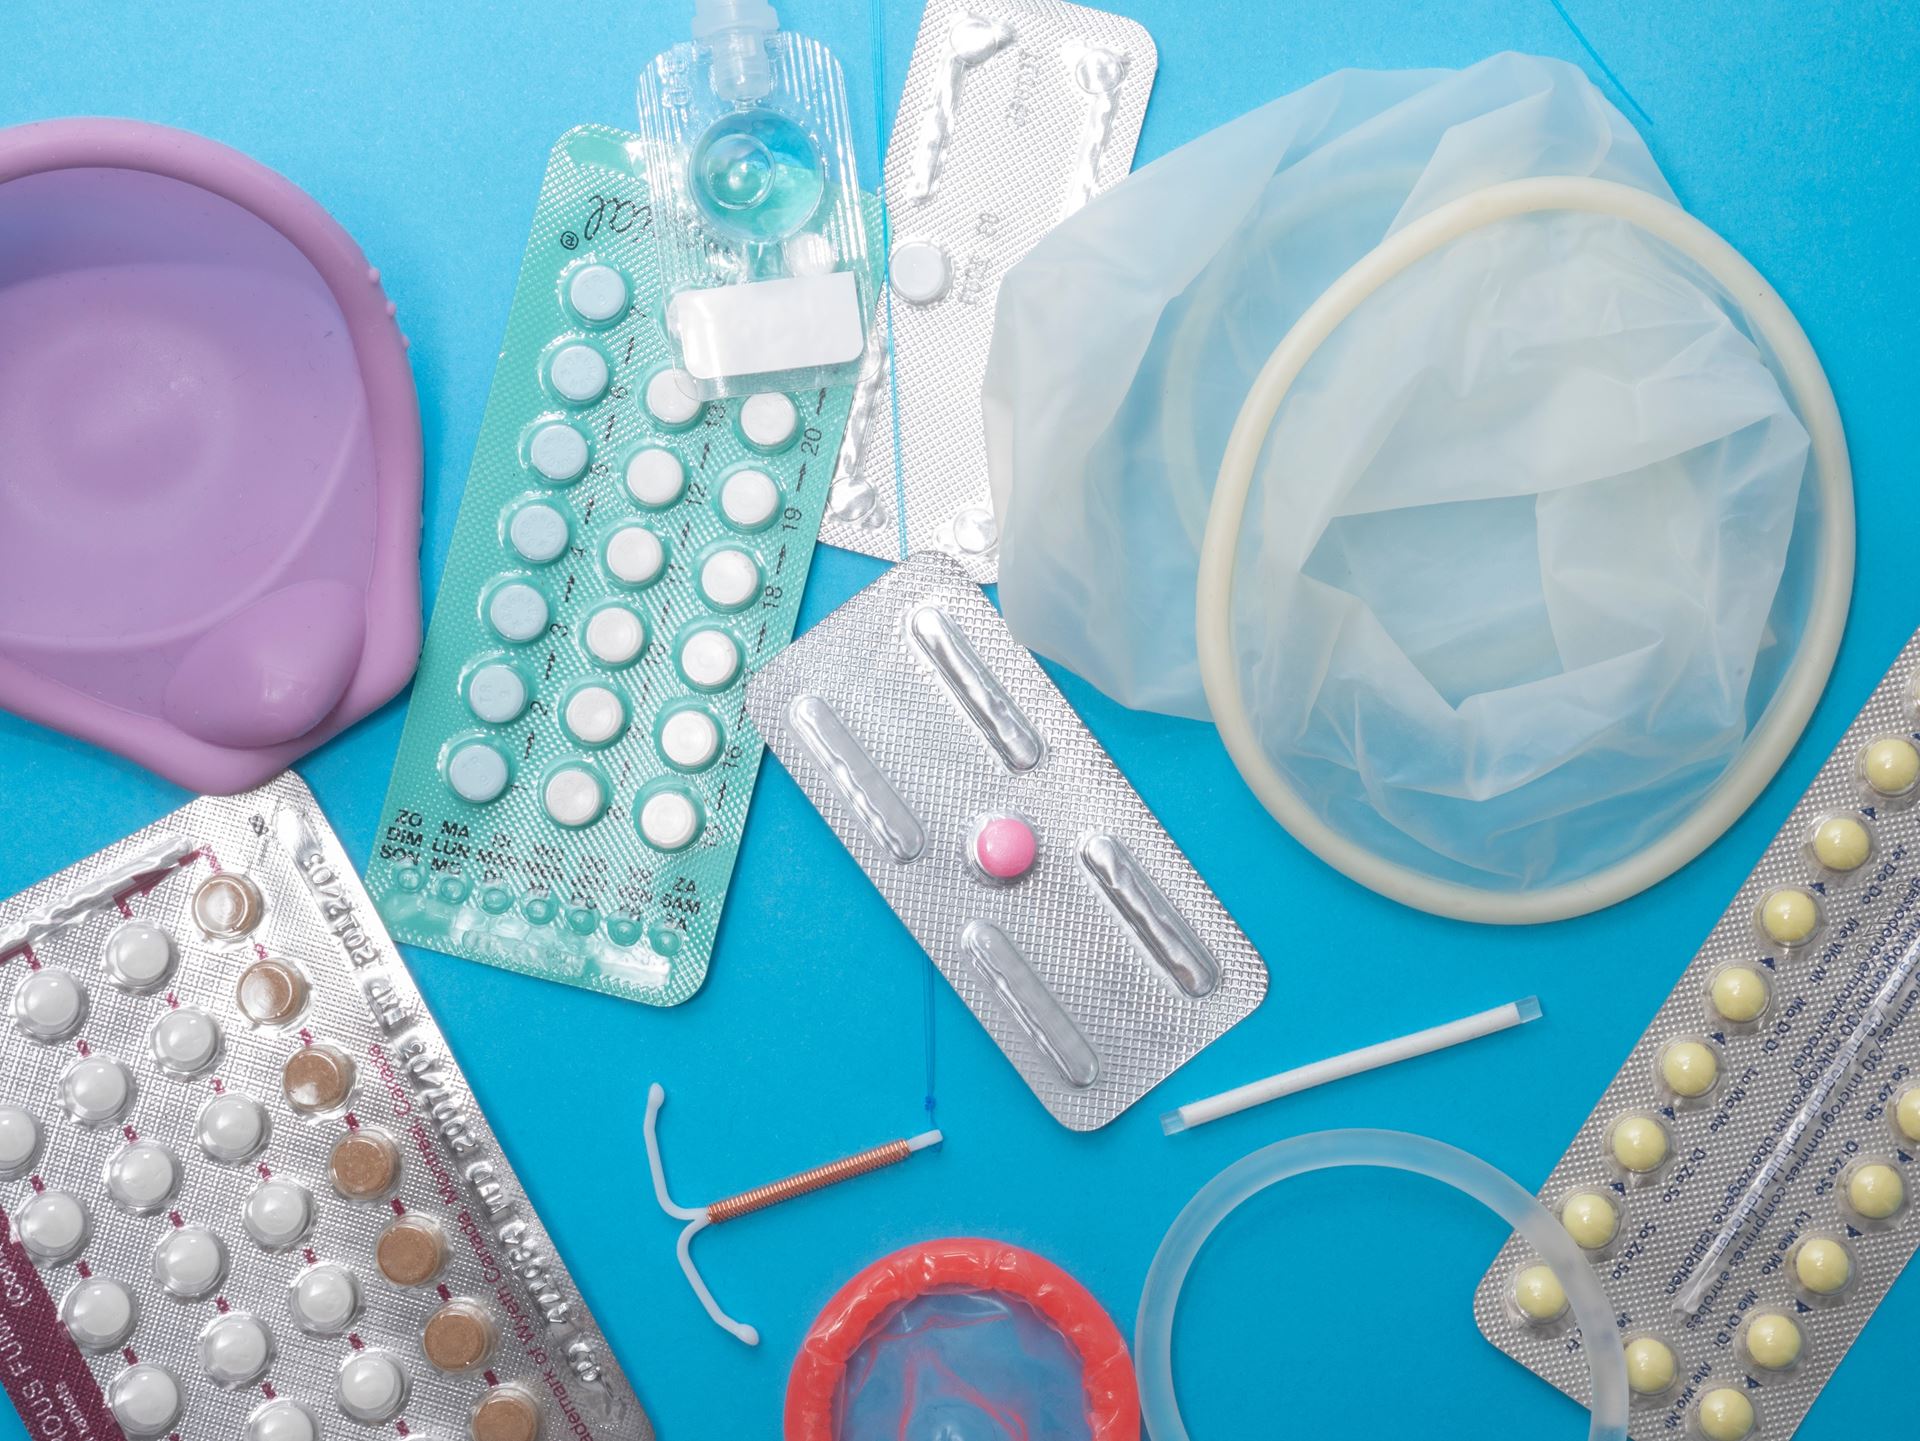 a selection of different contraception